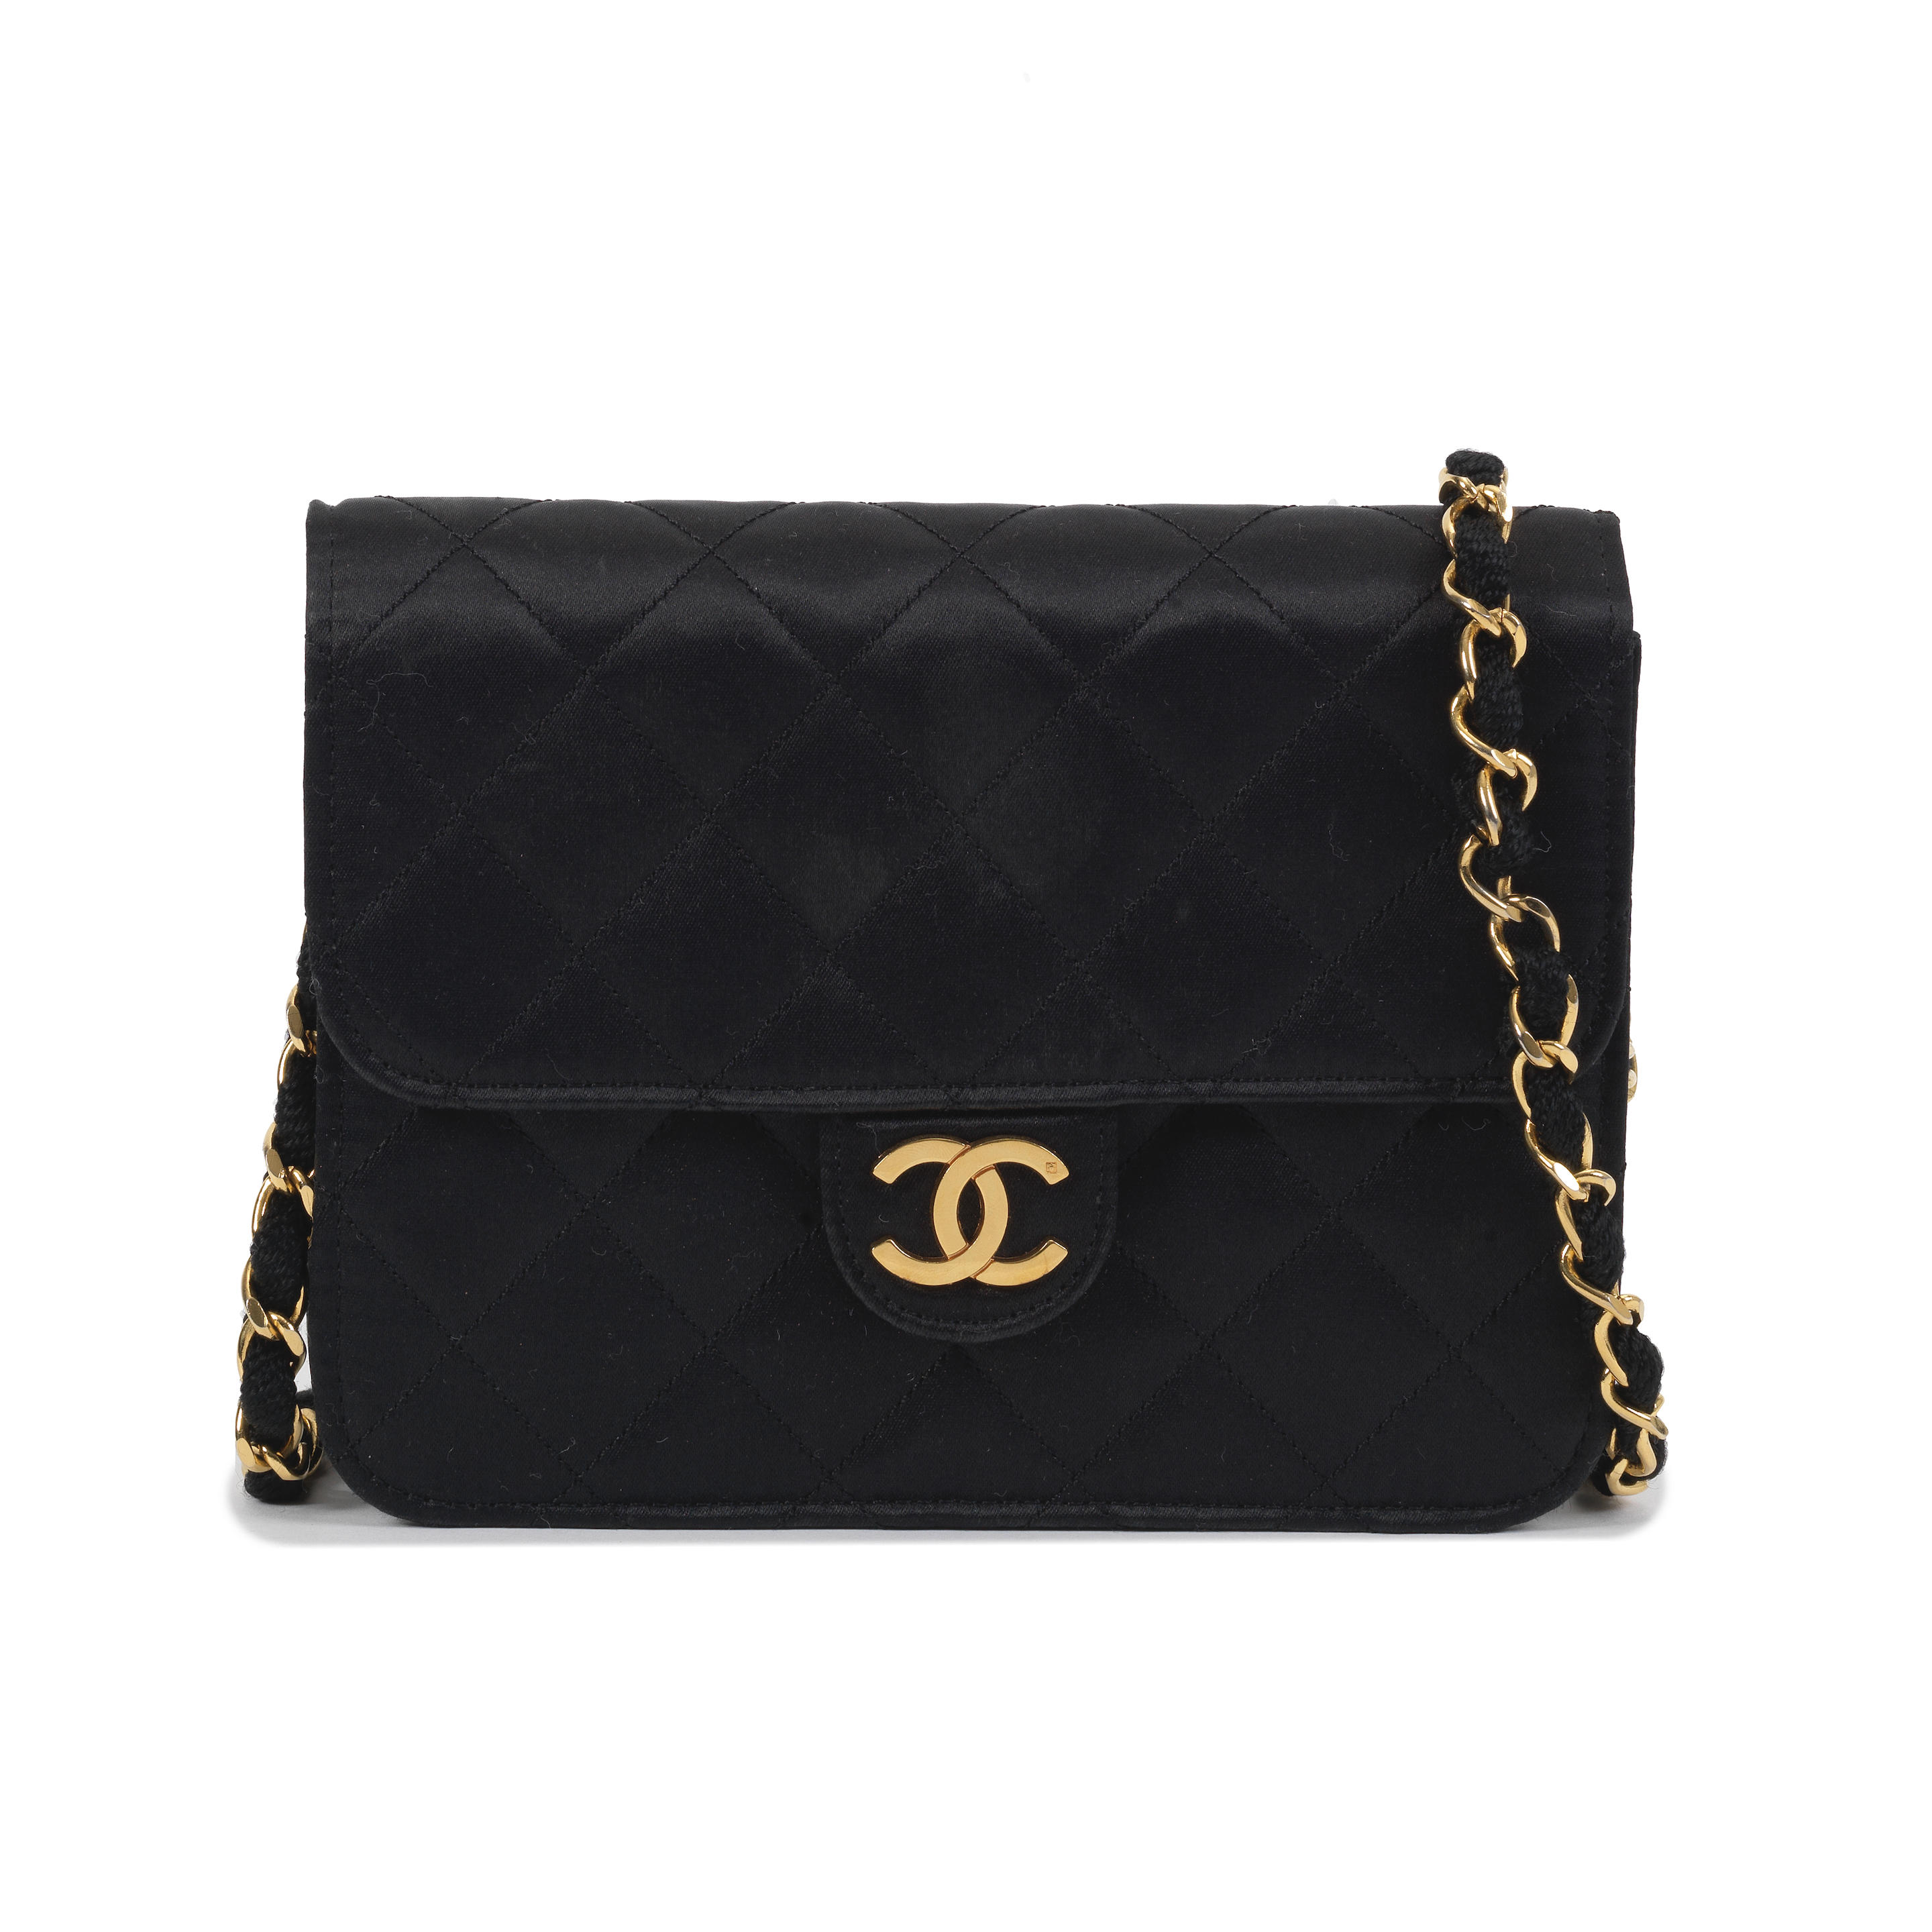 Bonhams : Karl Lagerfeld for Chanel a Black Satin Mini Flap Bag 1986-88  (includes serial sticker, authenticity card and dust bag)